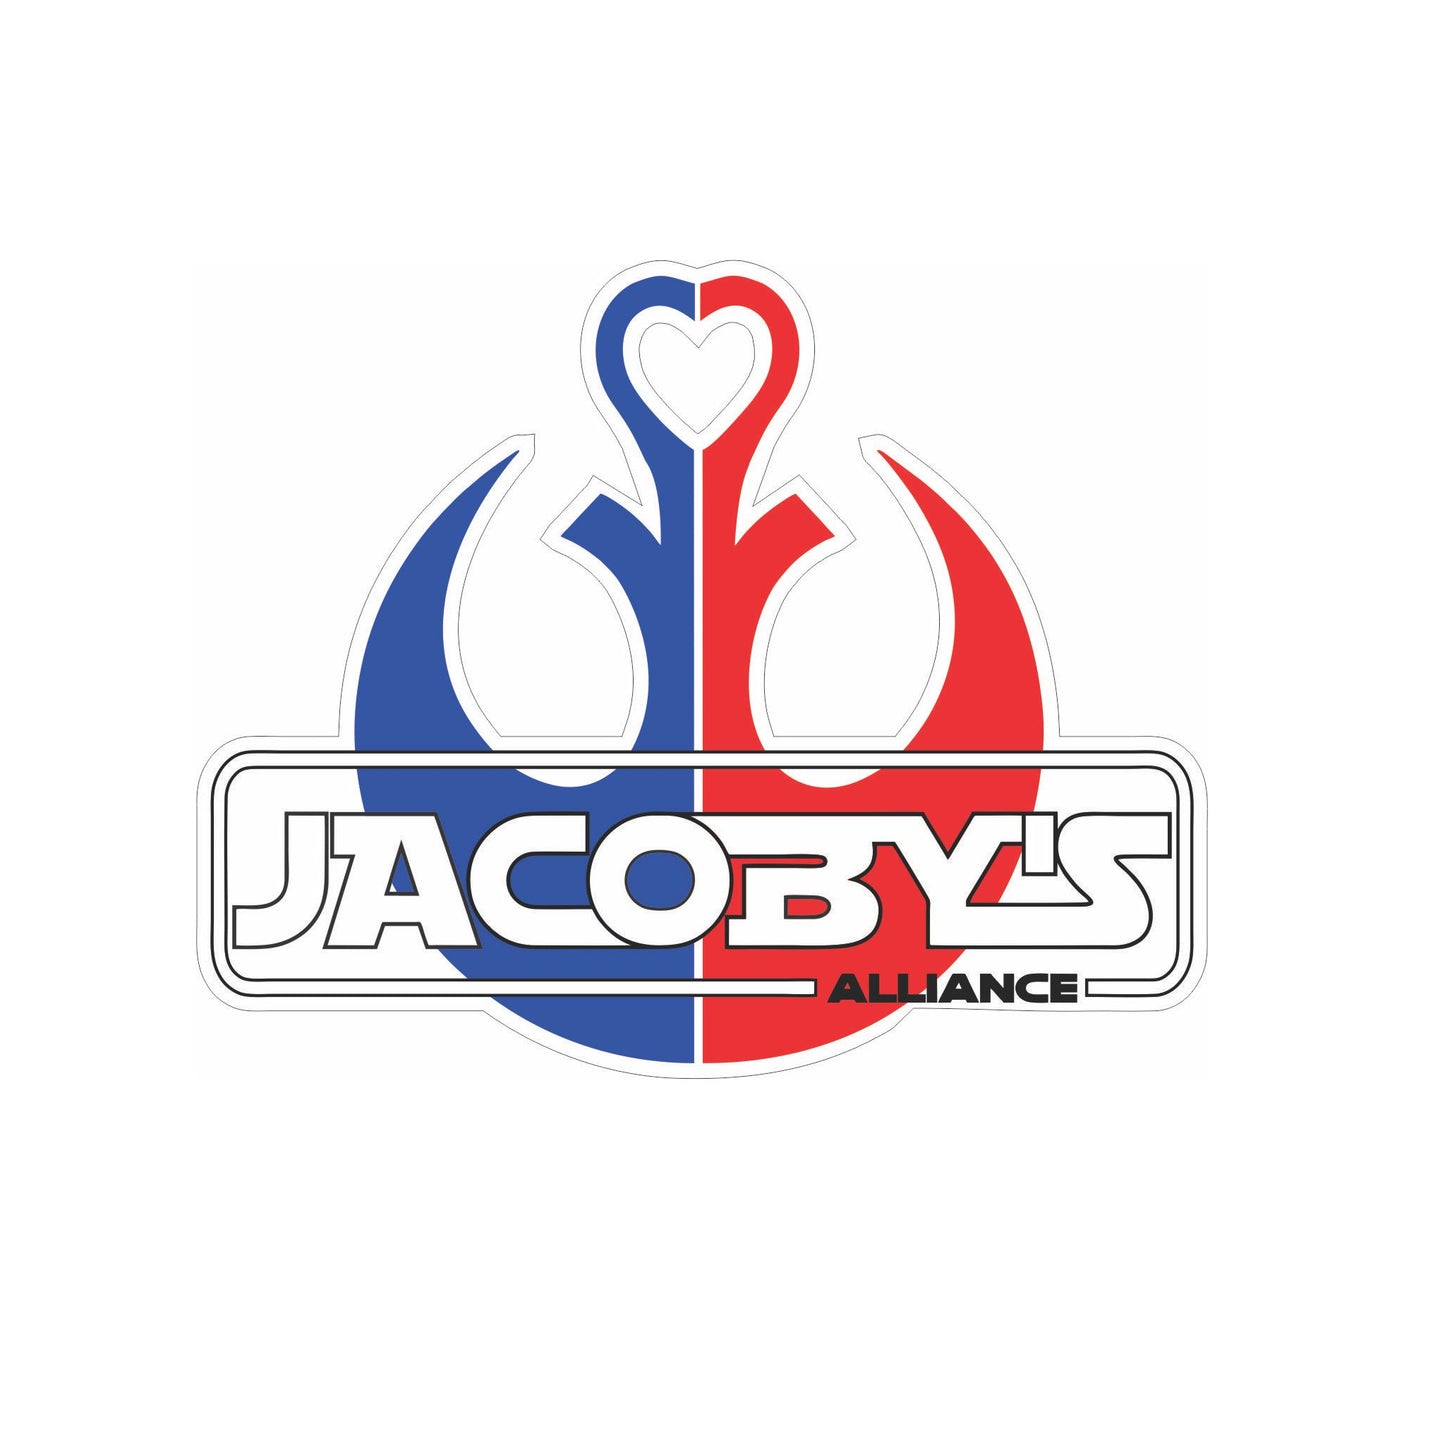 Jacoby's Alliance  Printed Vinyl Decal